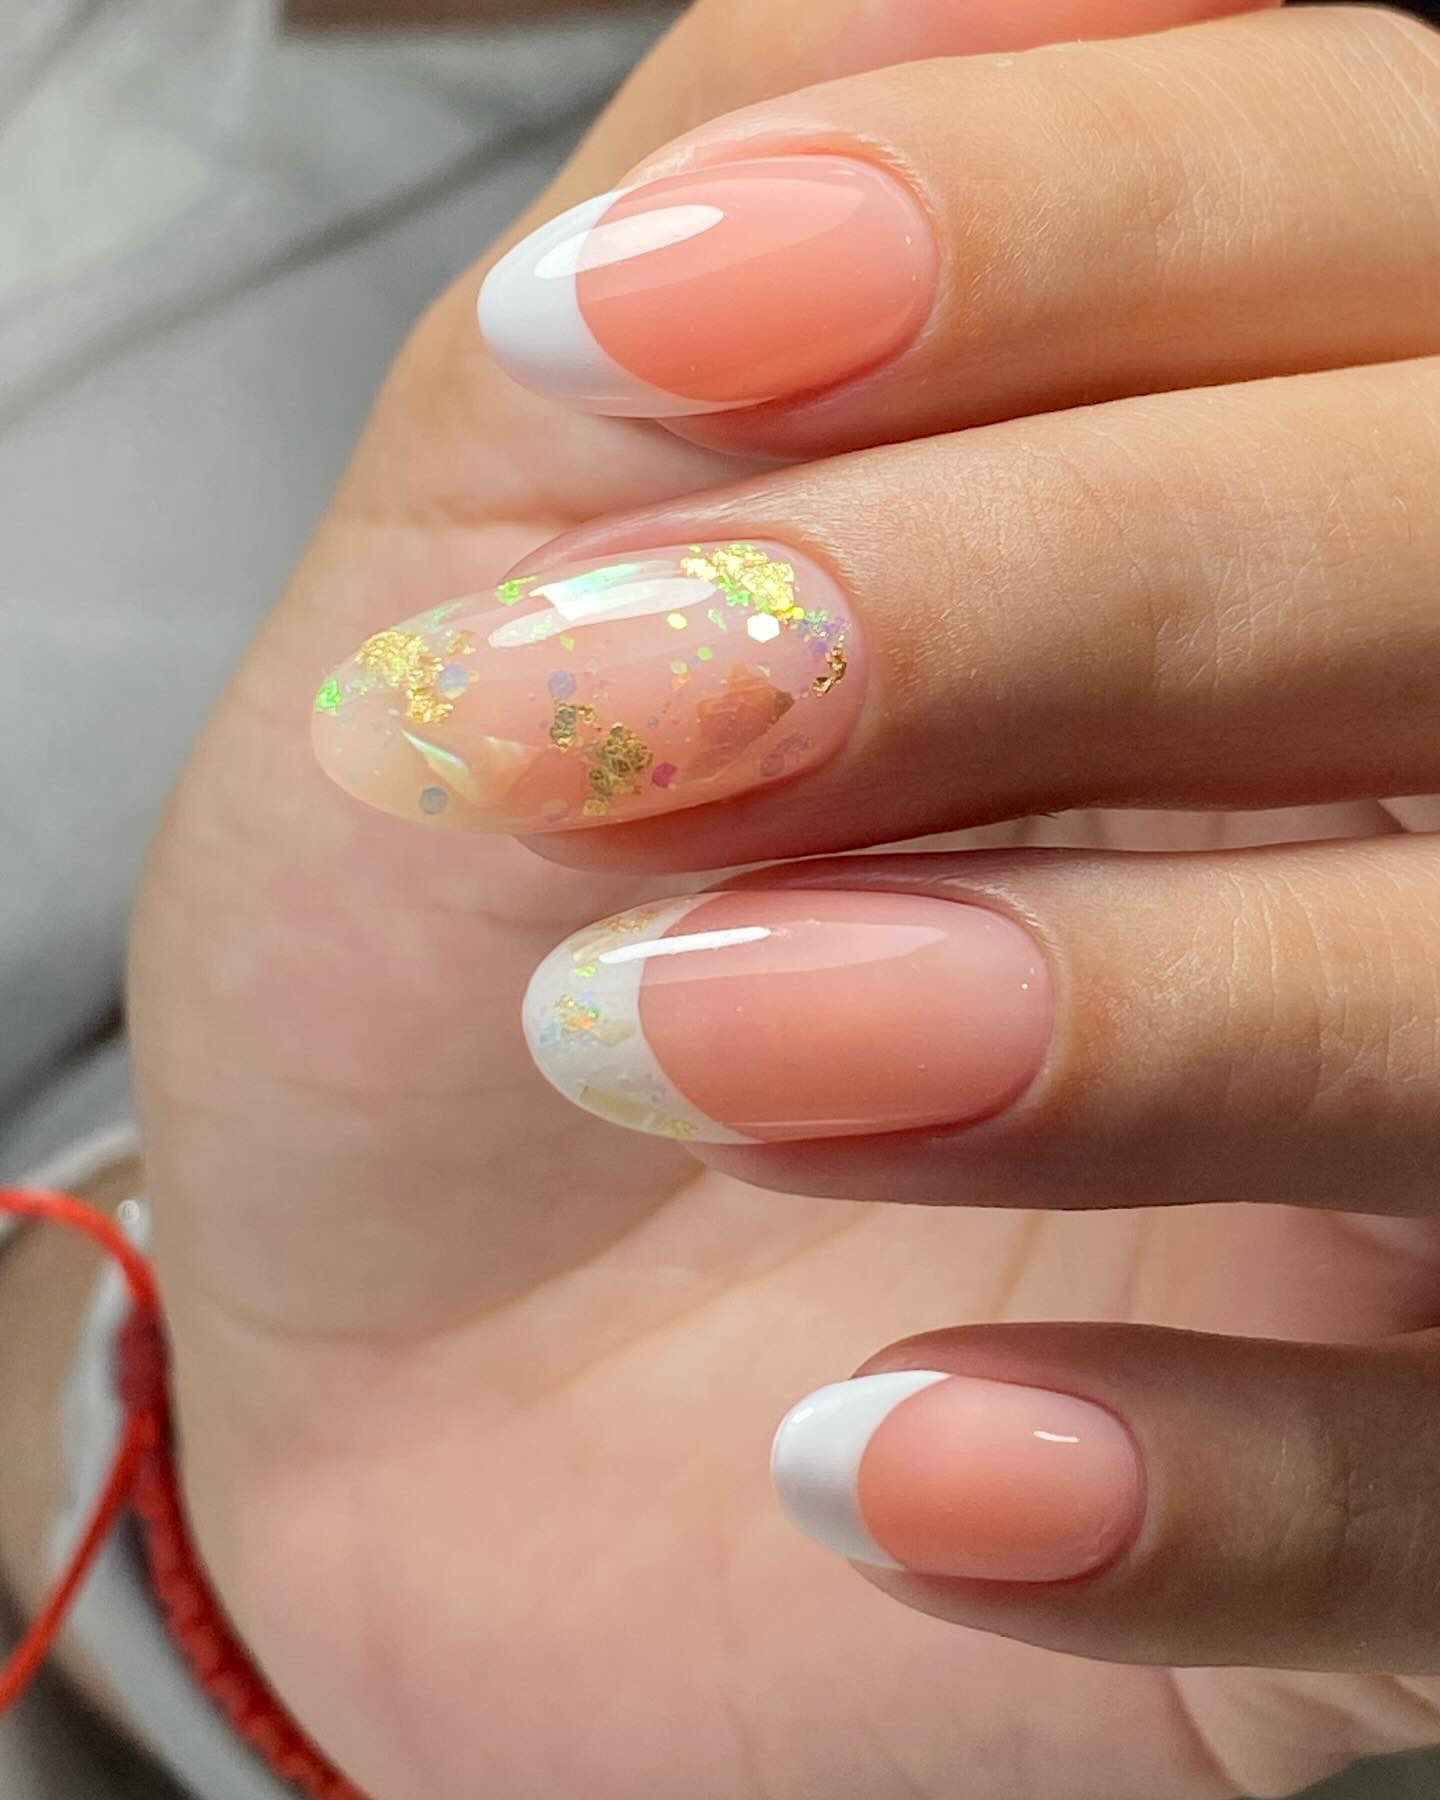 100+ Short Nail Designs You’ll Want To Try This Year images 58